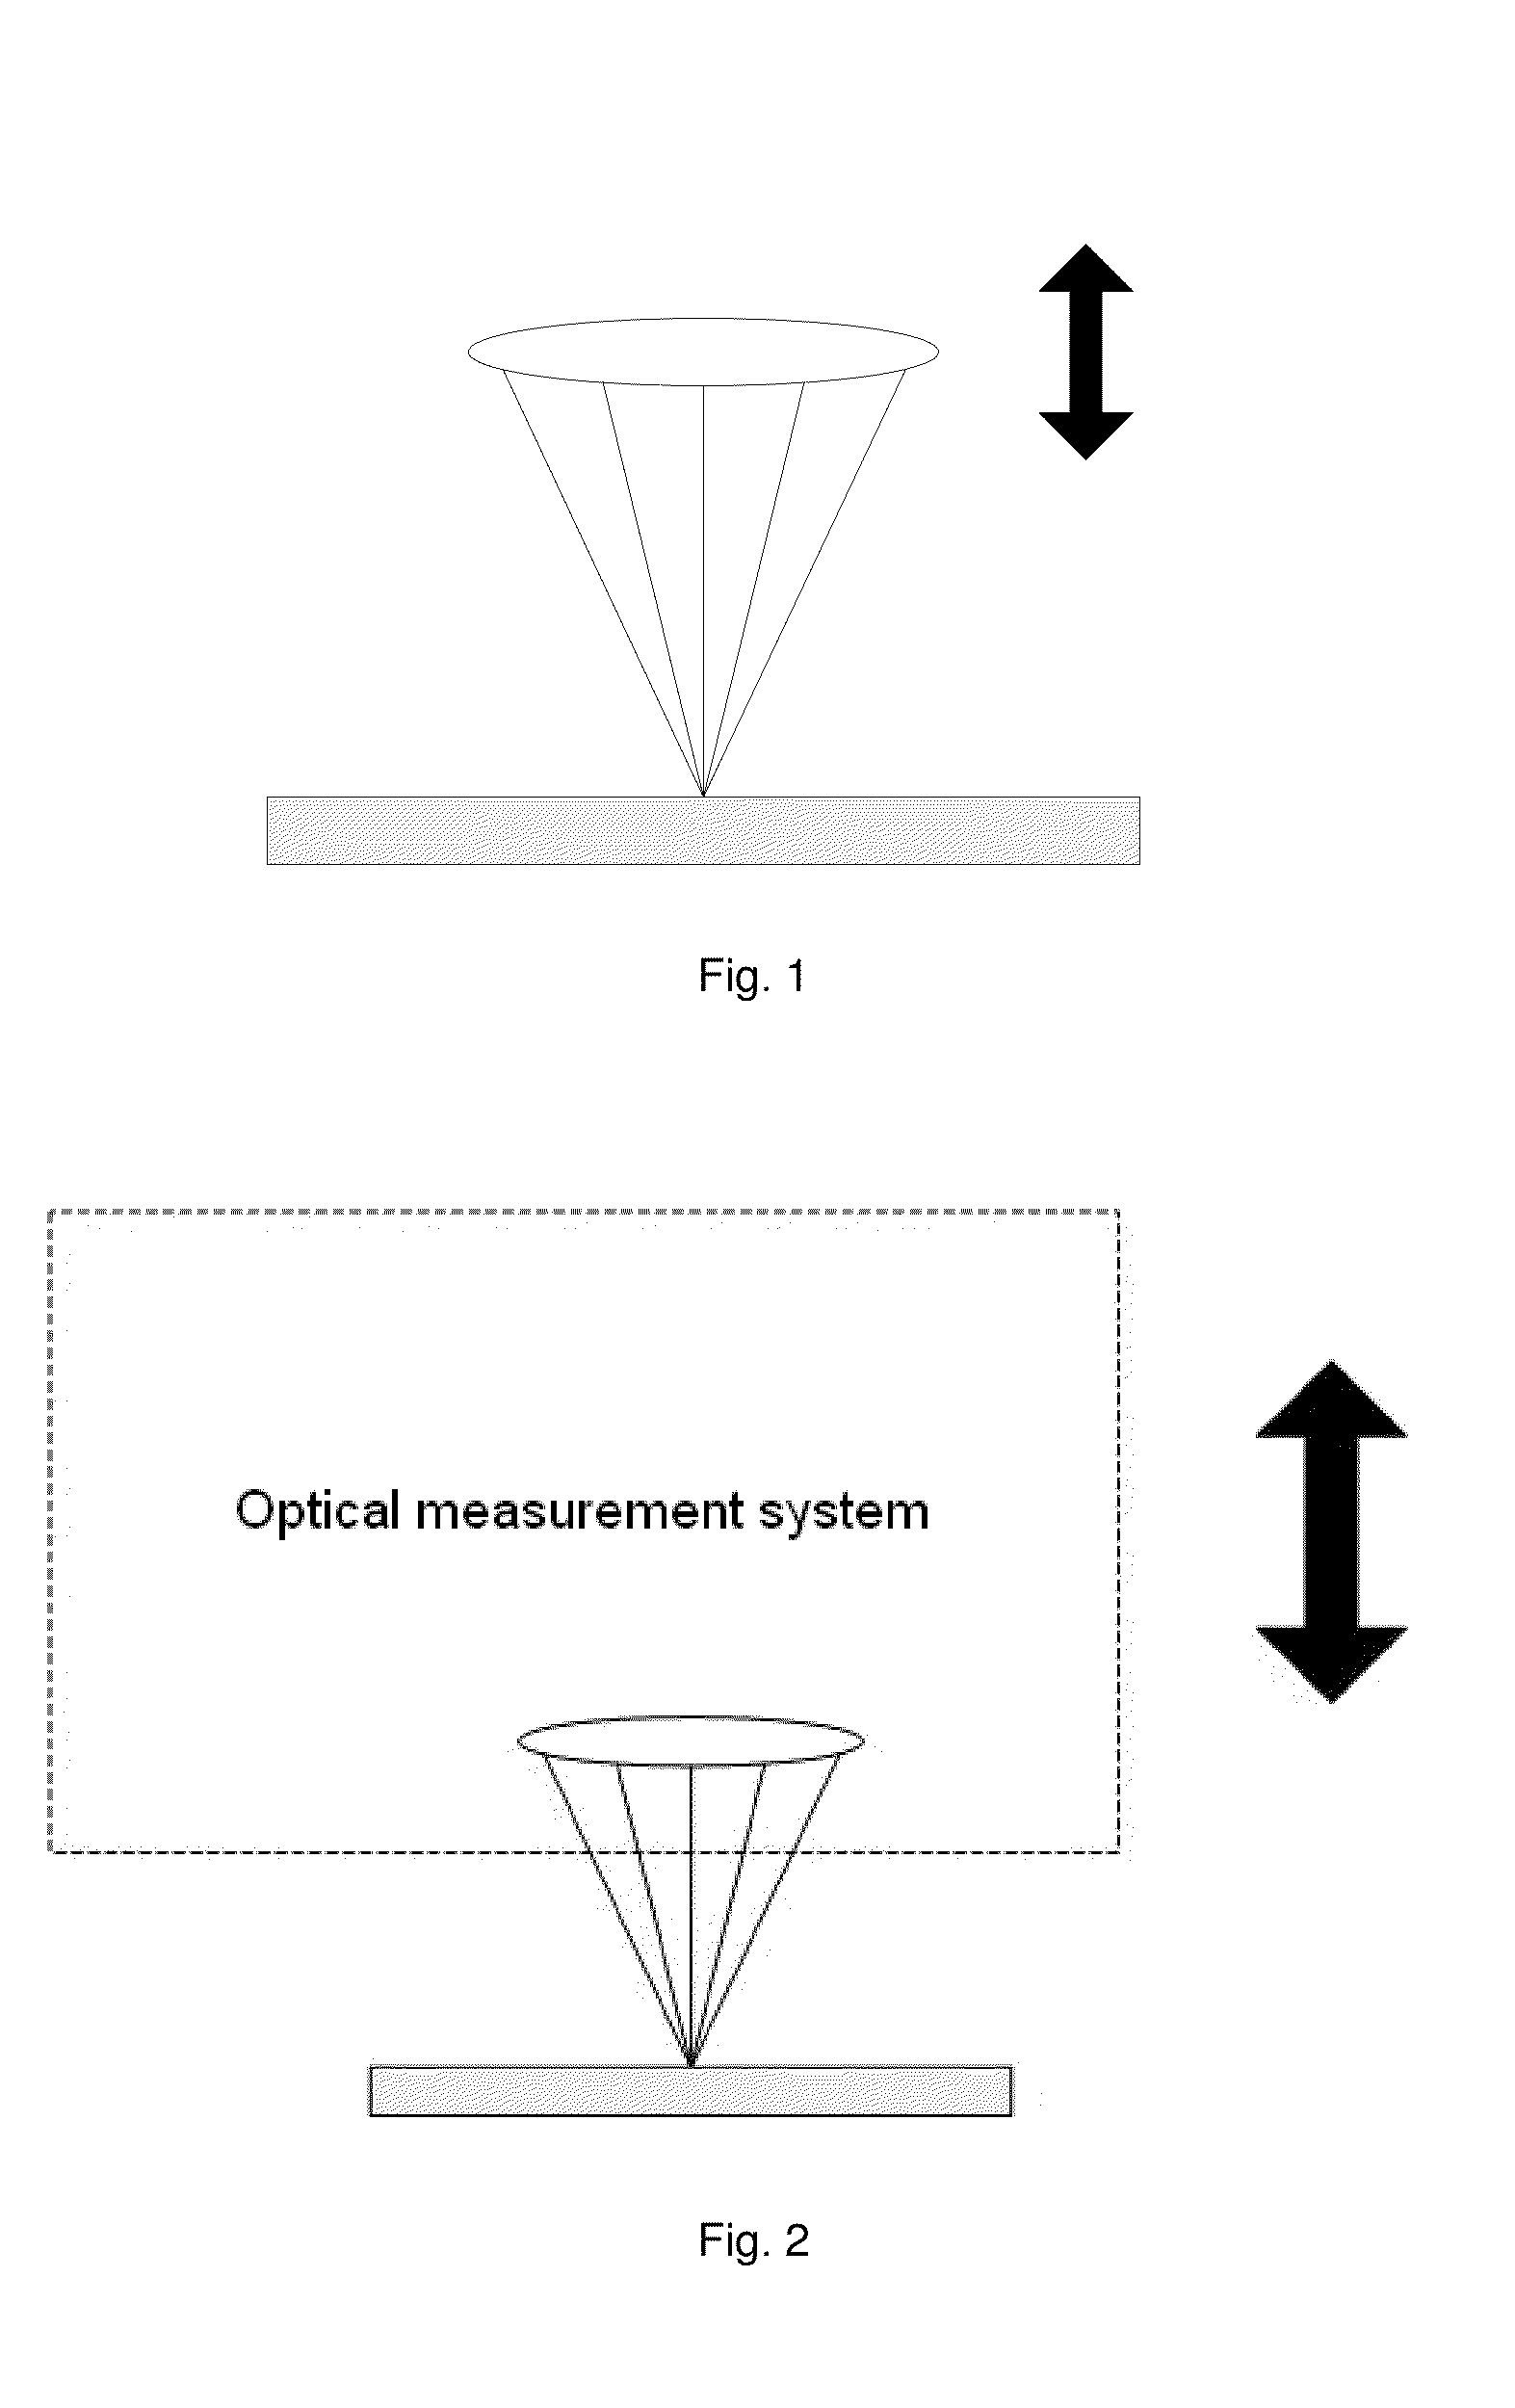 Normal-incidence broadband spectroscopic polarimeter containing reference beam and optical measurement system